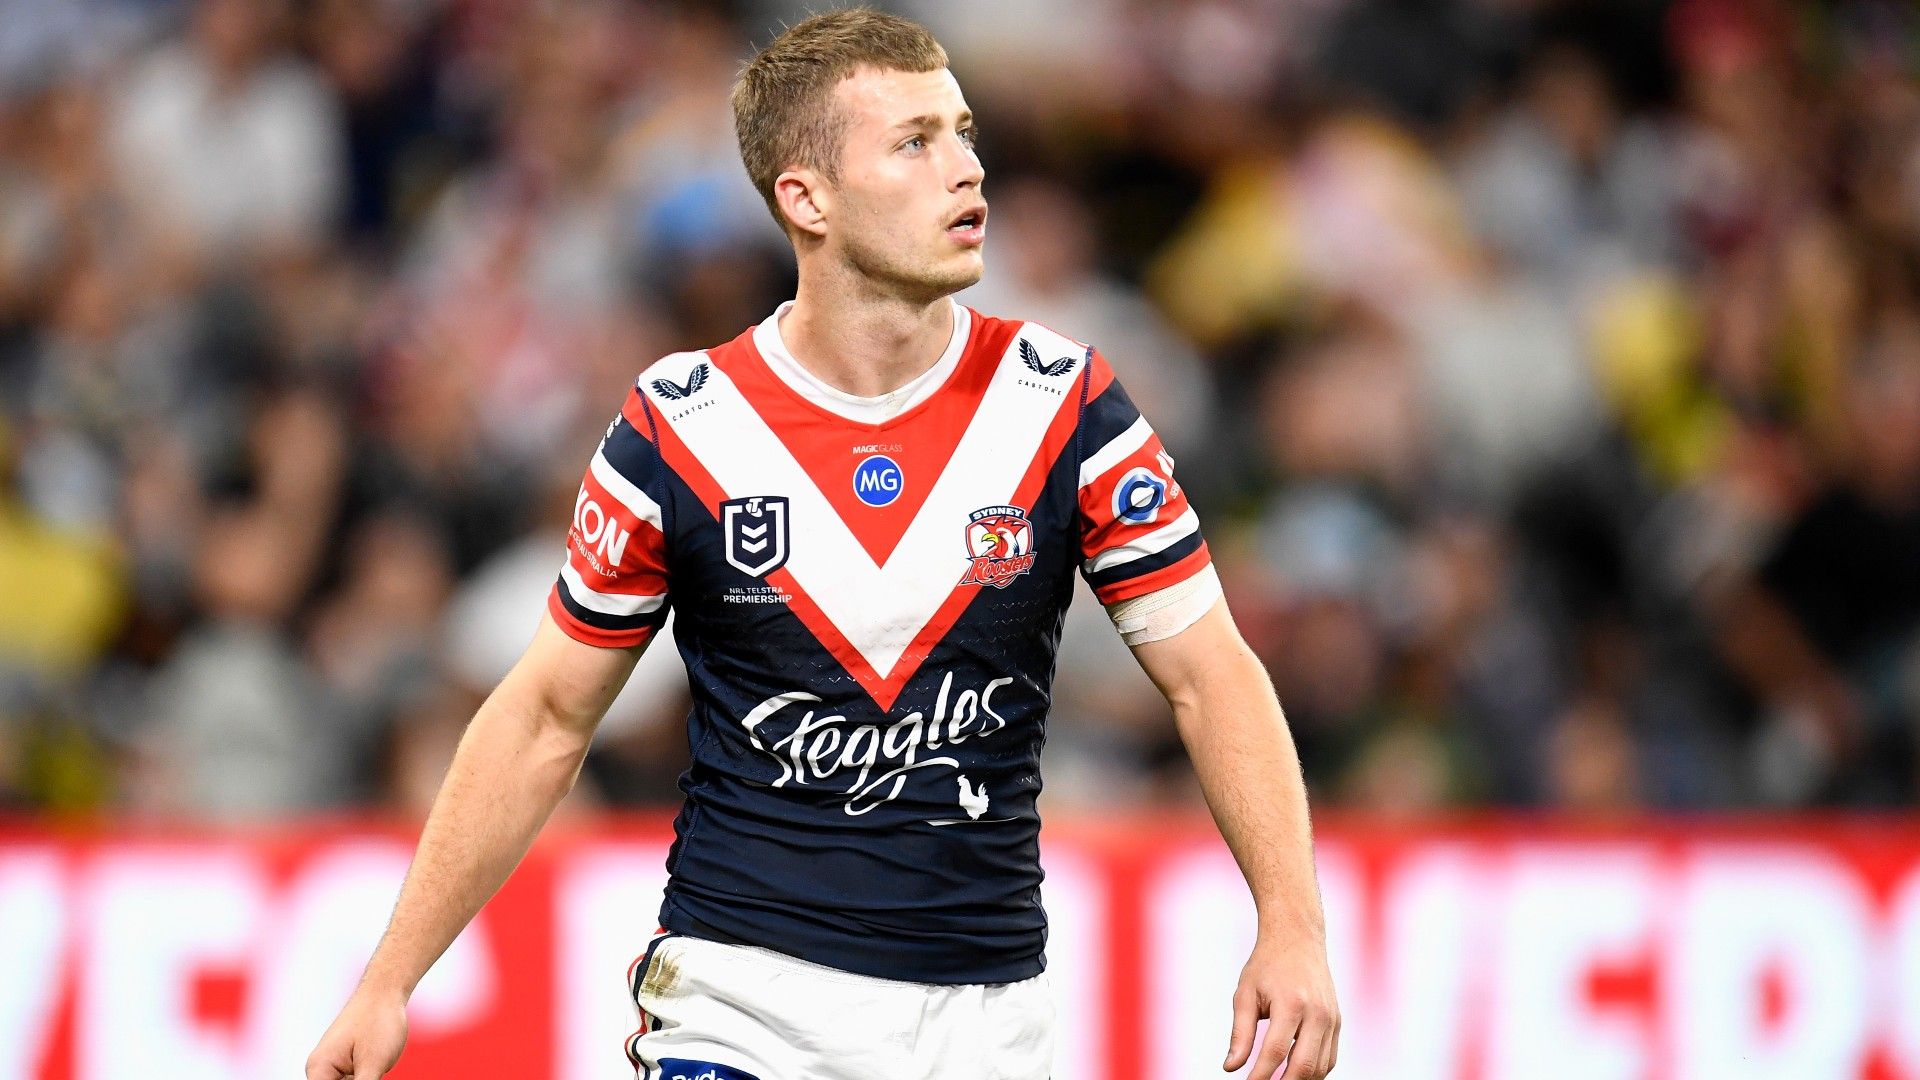 EXCLUSIVE: Sam Walker's big moment came after his field goal, says Sterlo